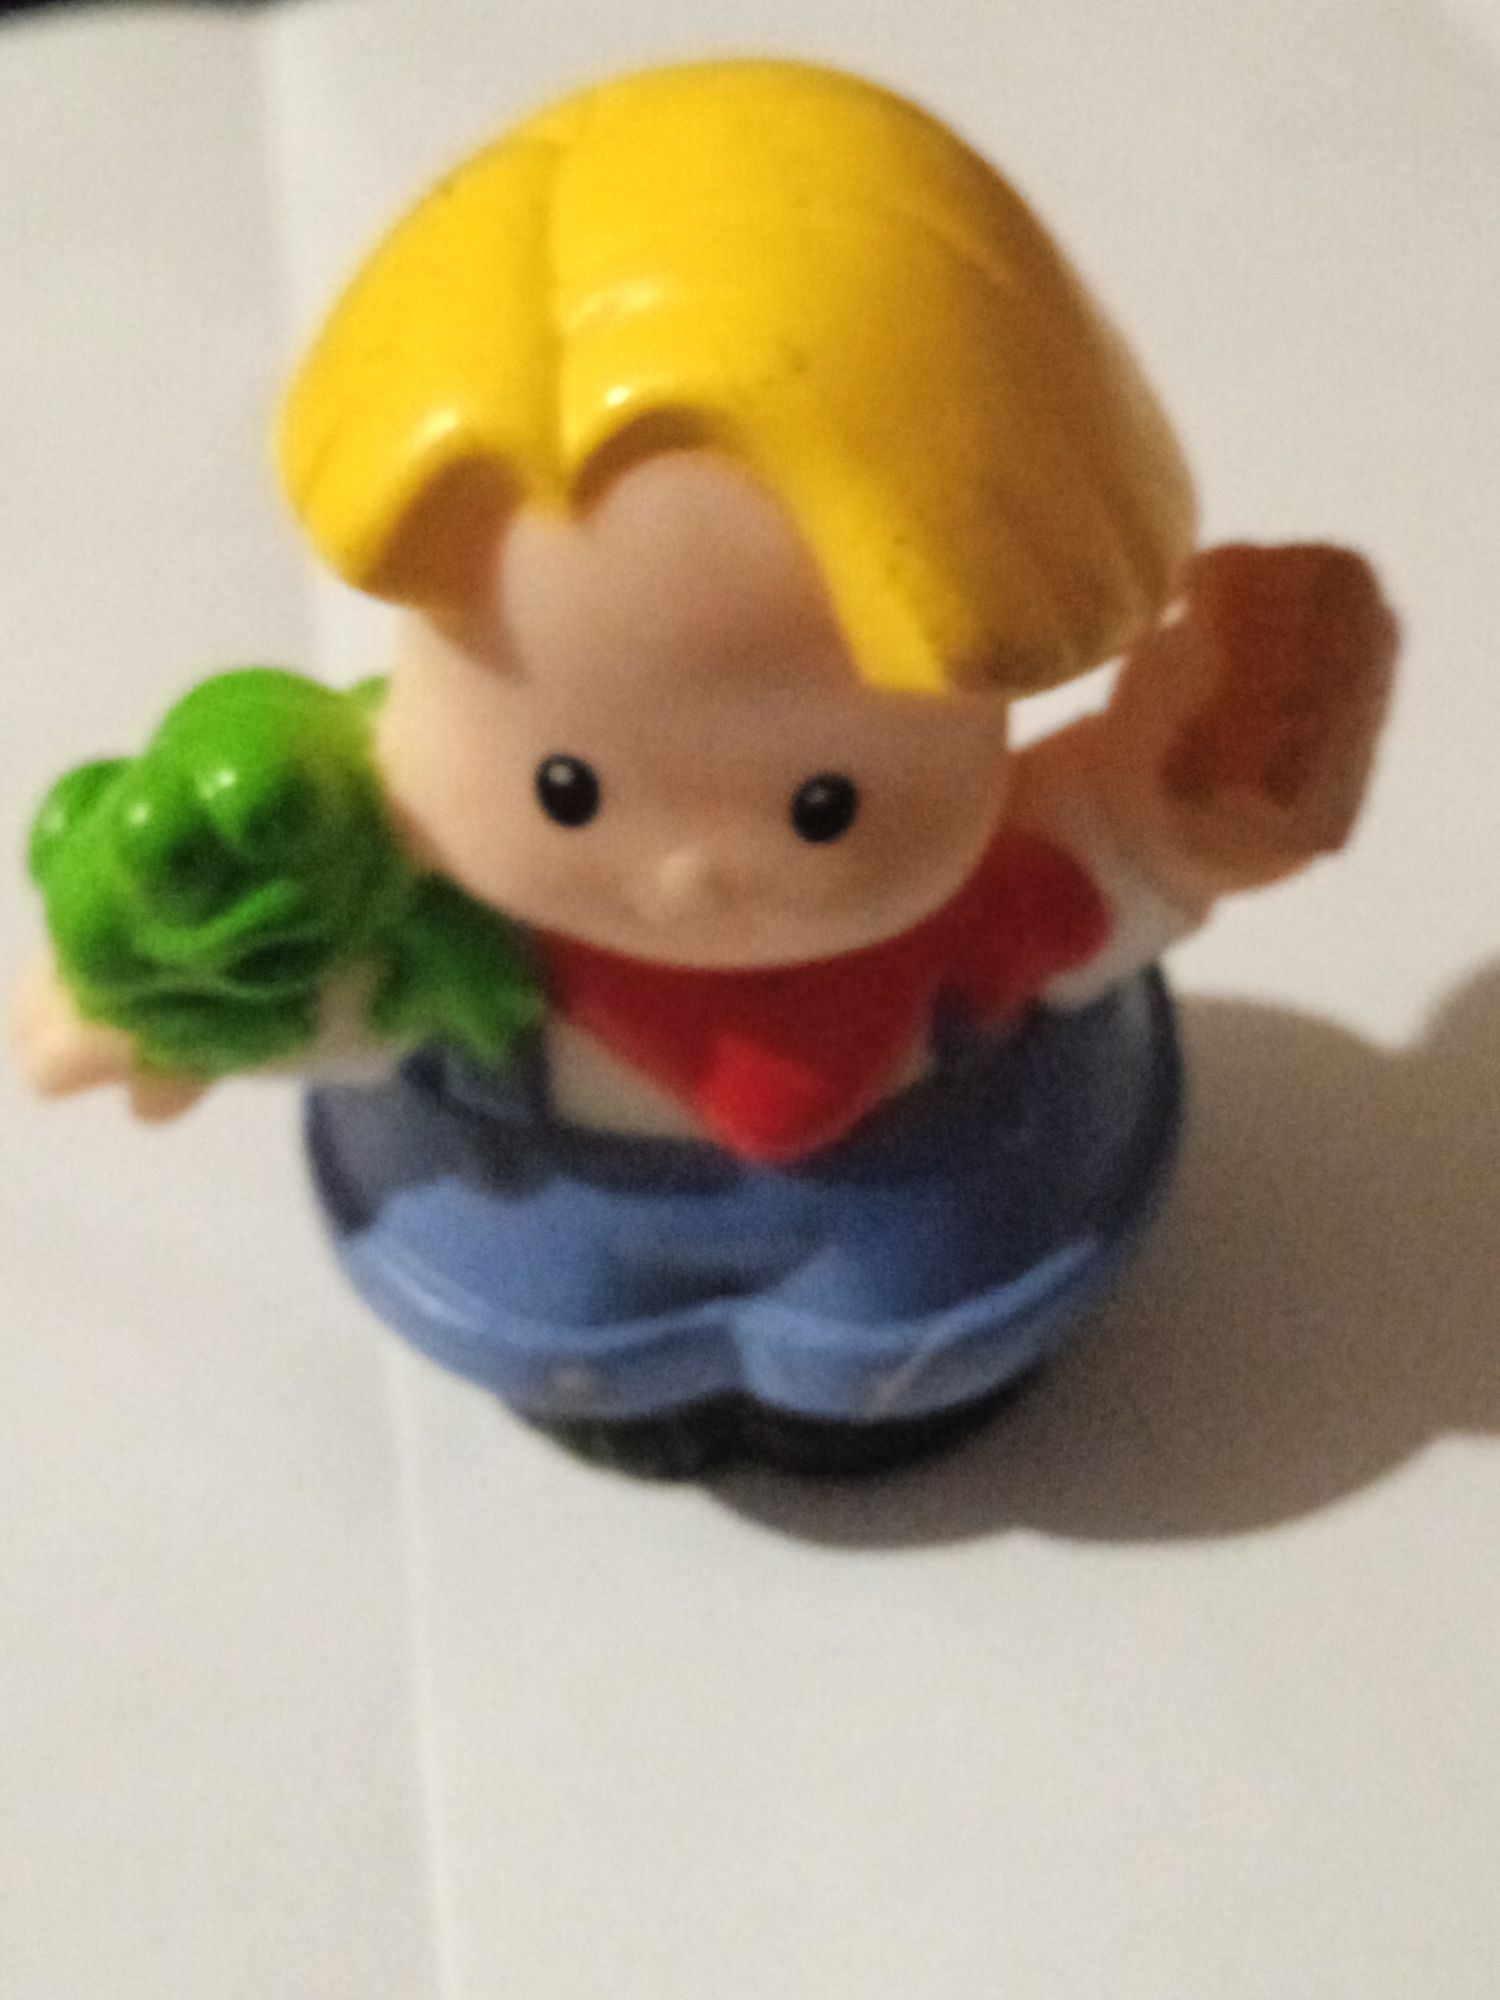 Figurine - Fisher Price - Little People - Personnage Avec Grenouille - Réf 11/04 T L